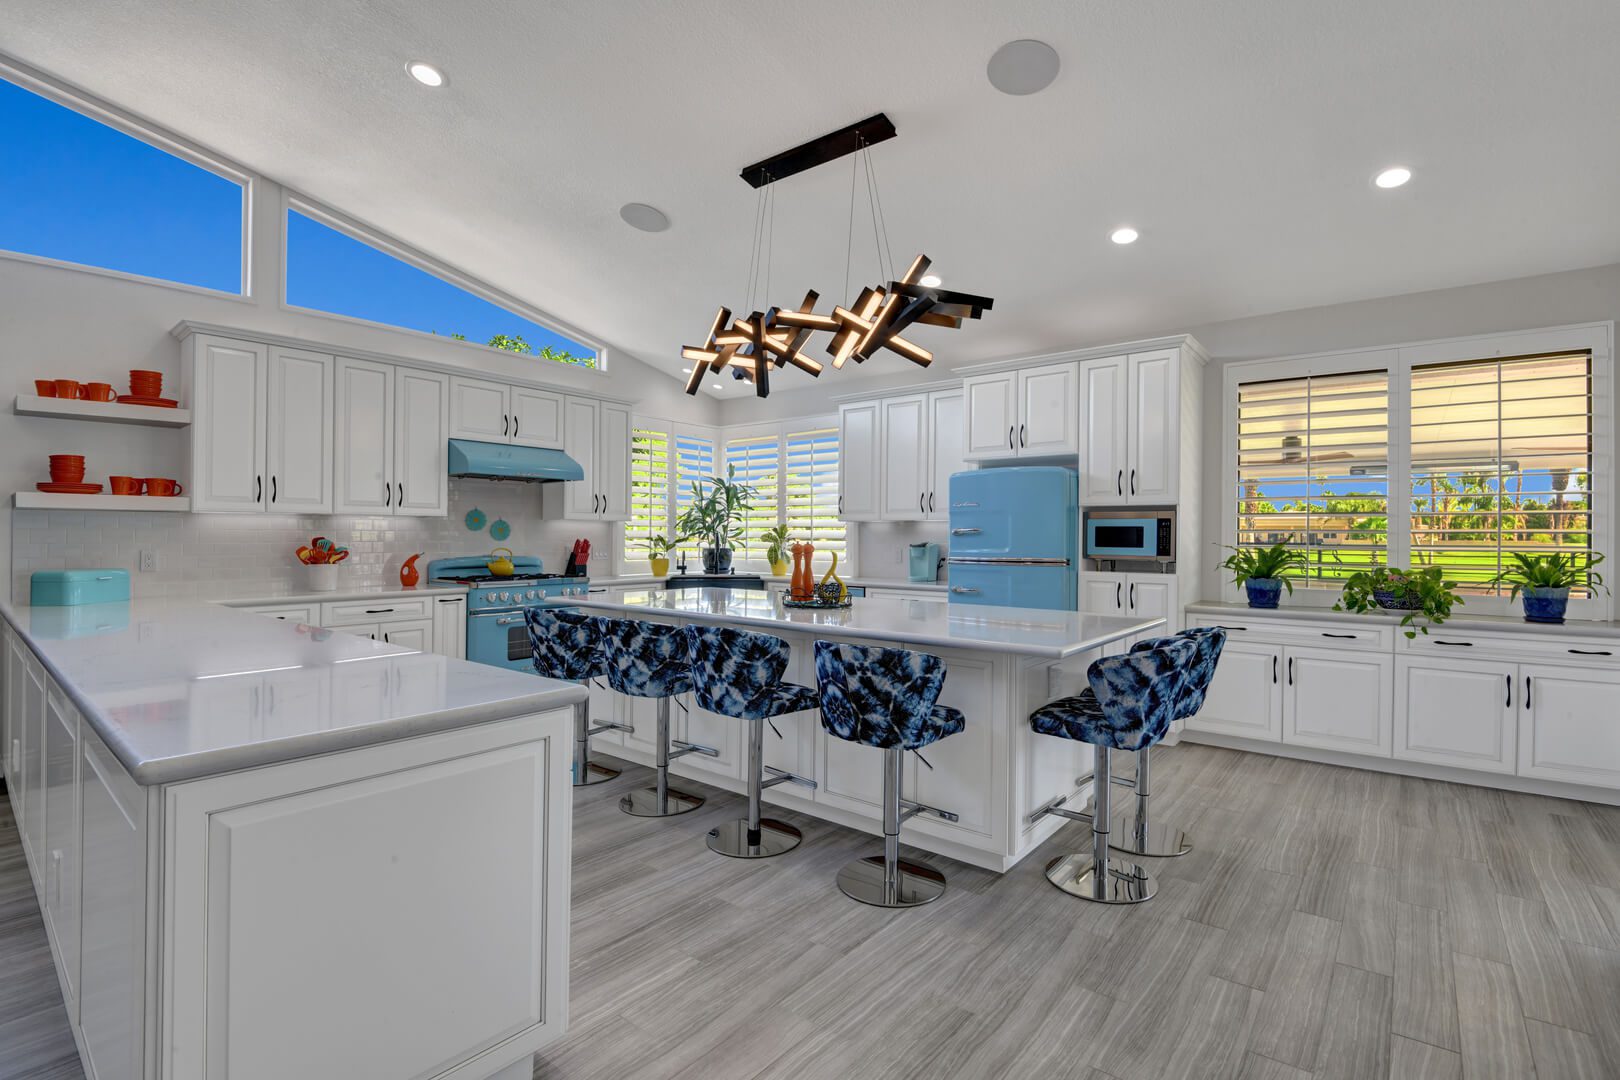 A kitchen with white cabinets and blue chairs.